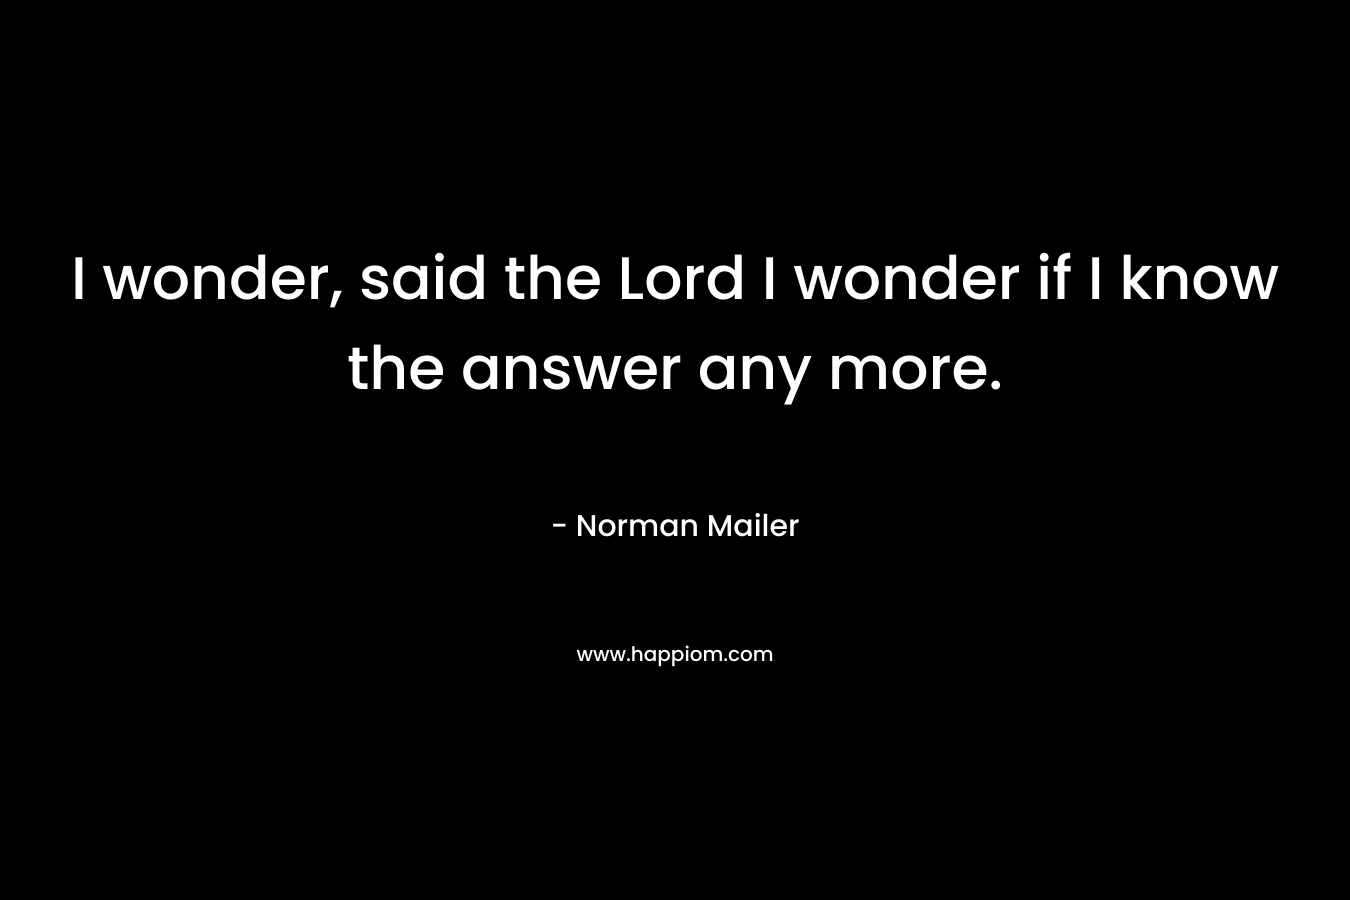 I wonder, said the Lord I wonder if I know the answer any more.